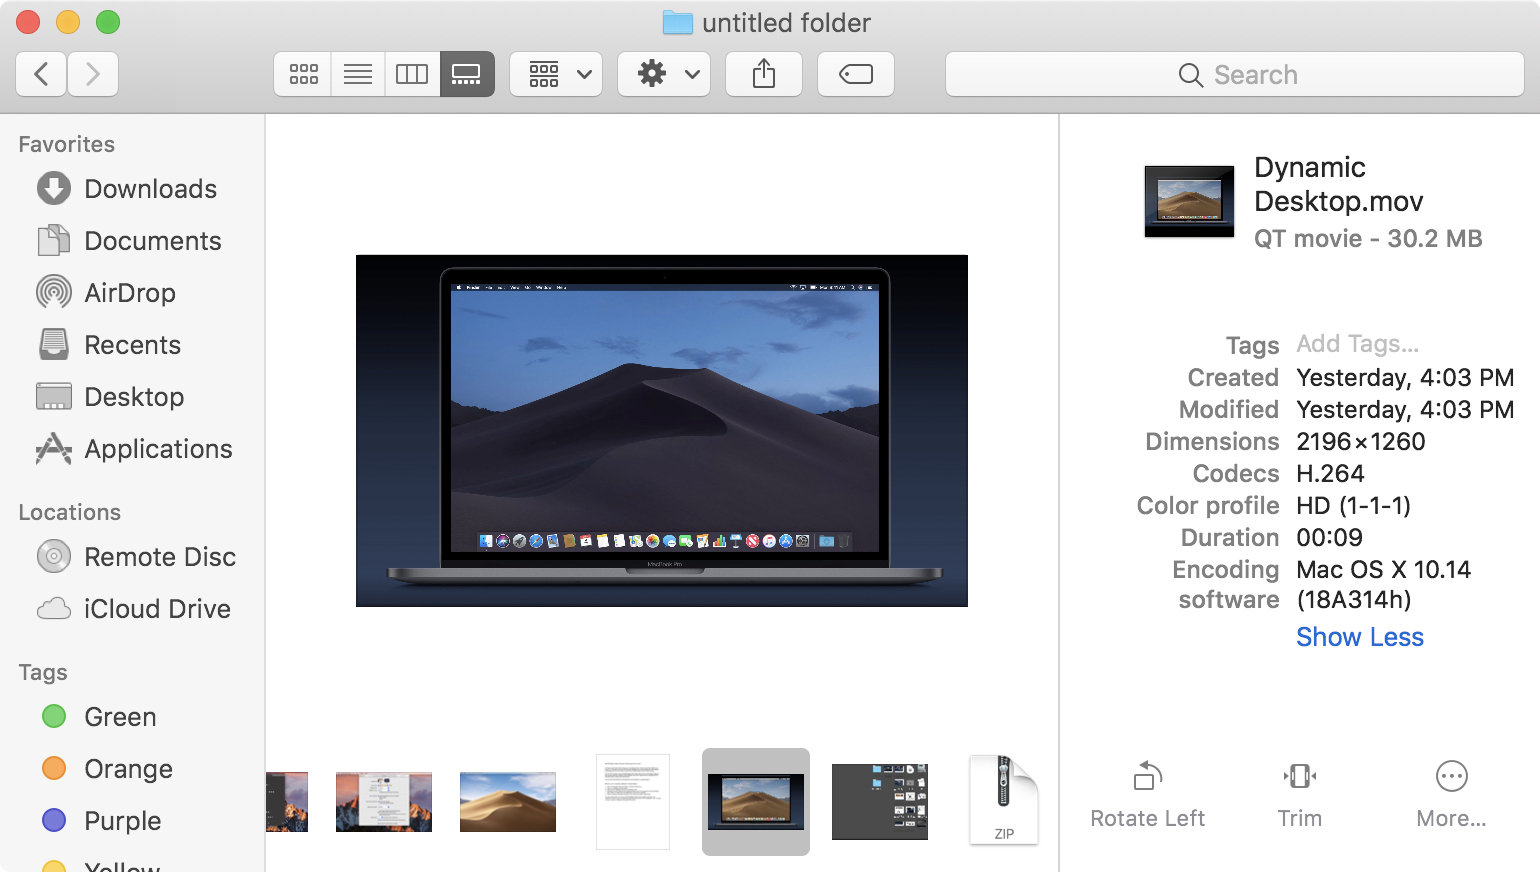 Does Garageband Work With The Mac Mojave Os